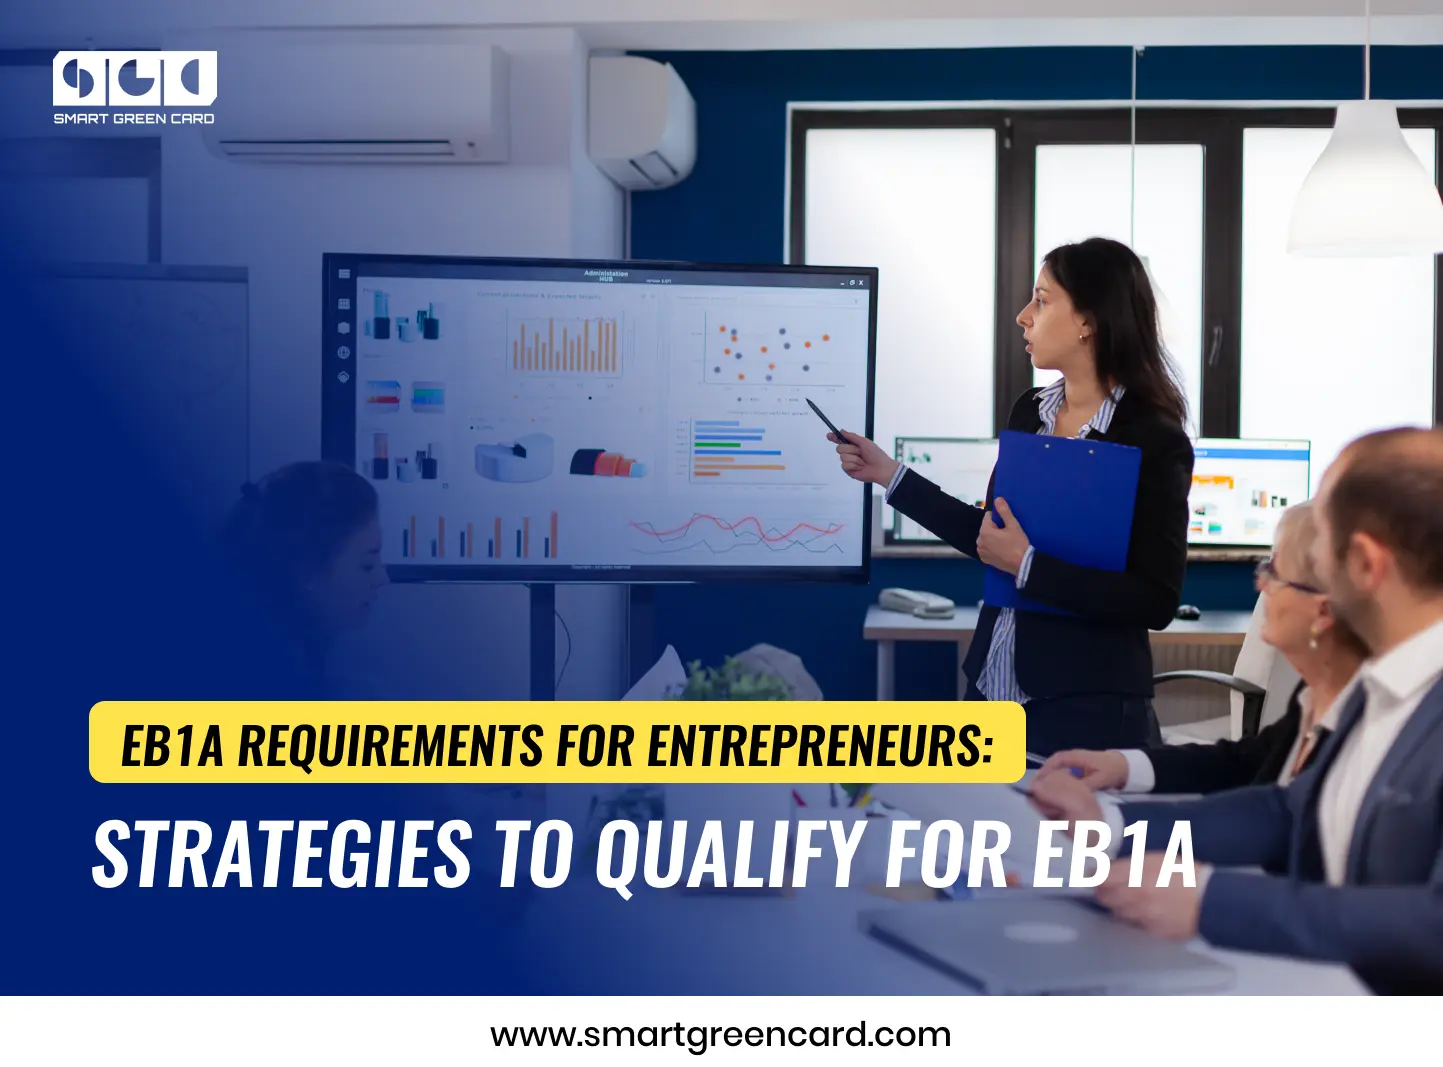 EB1A Requirements for Entrepreneurs and Strategies to qualify for EB1A